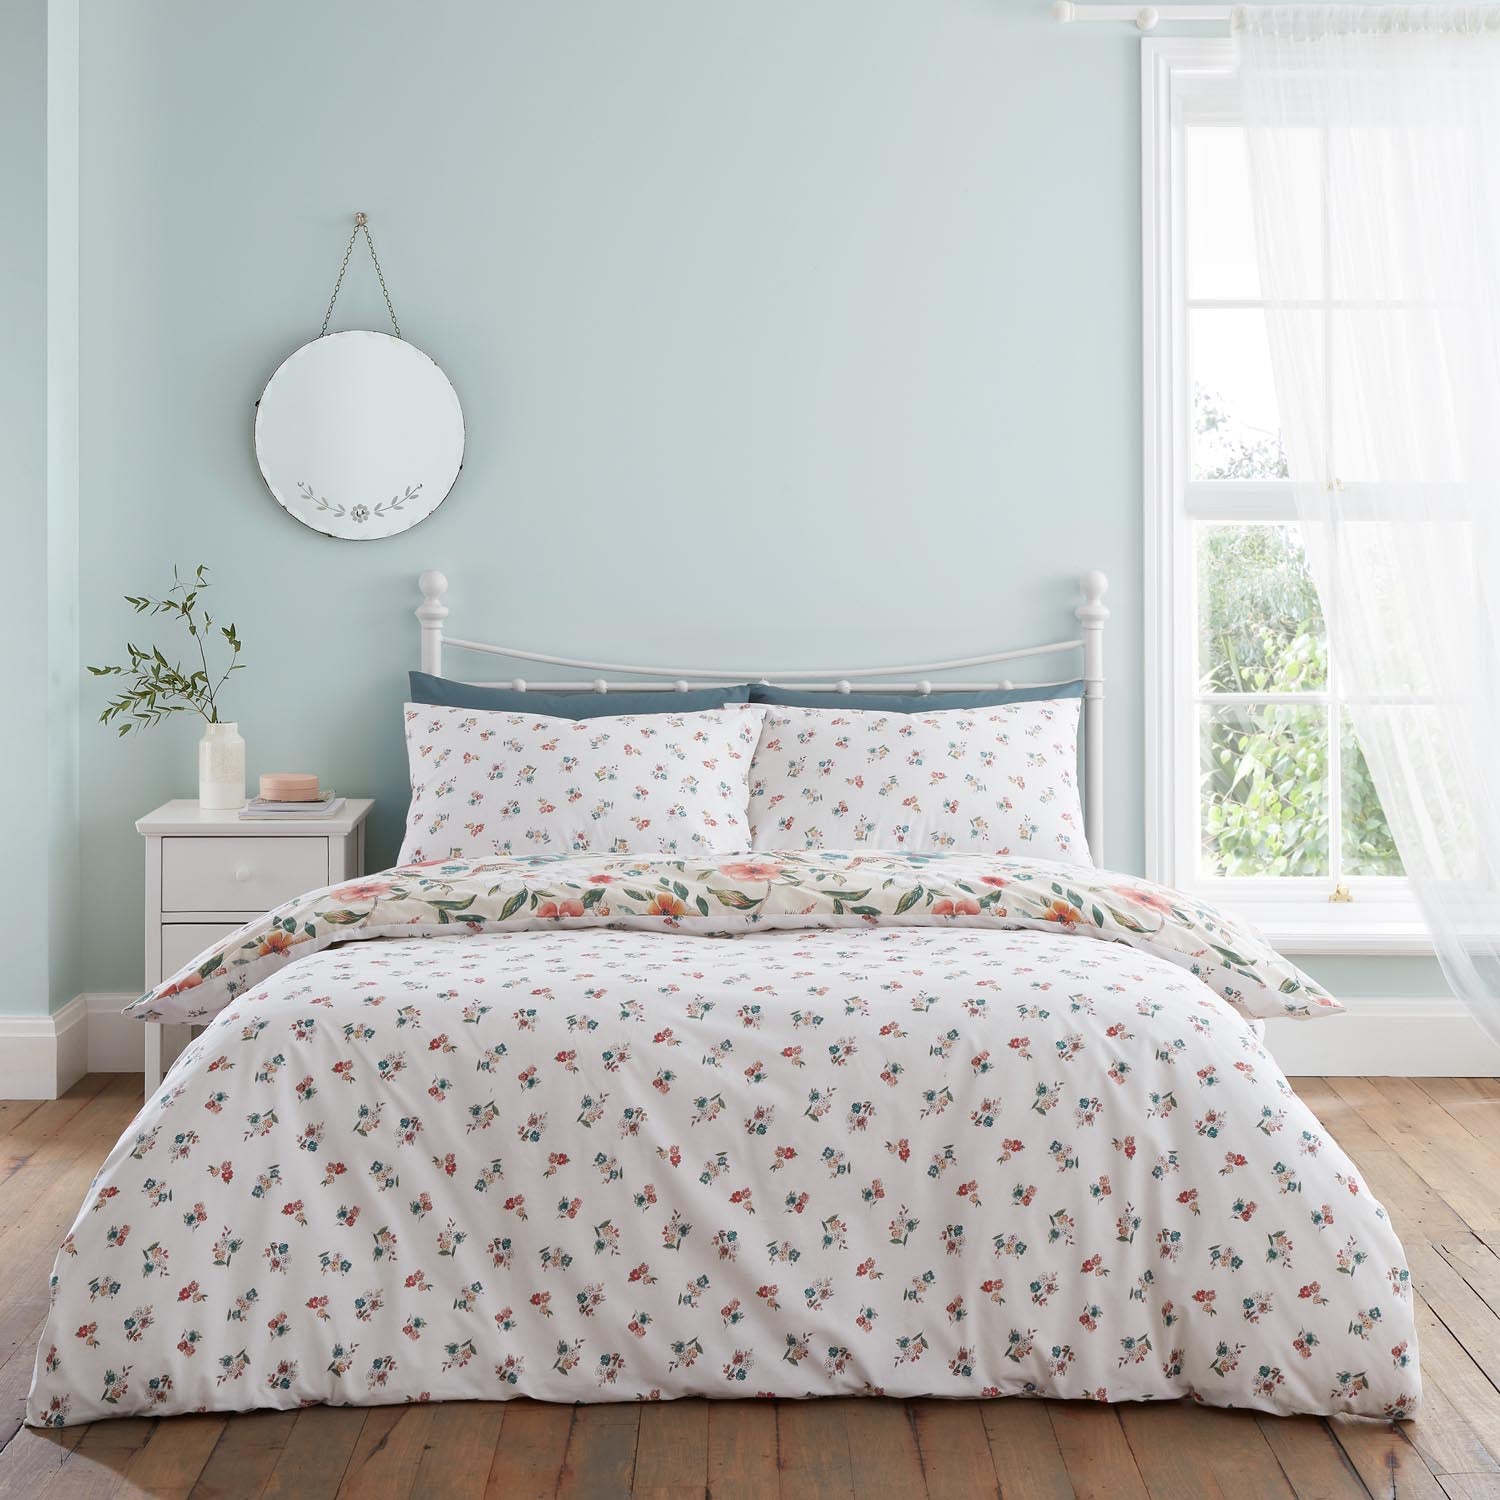 The Home Luxury Collection Eilley Floral Birds Duvet Cover 5 Shaws Department Stores